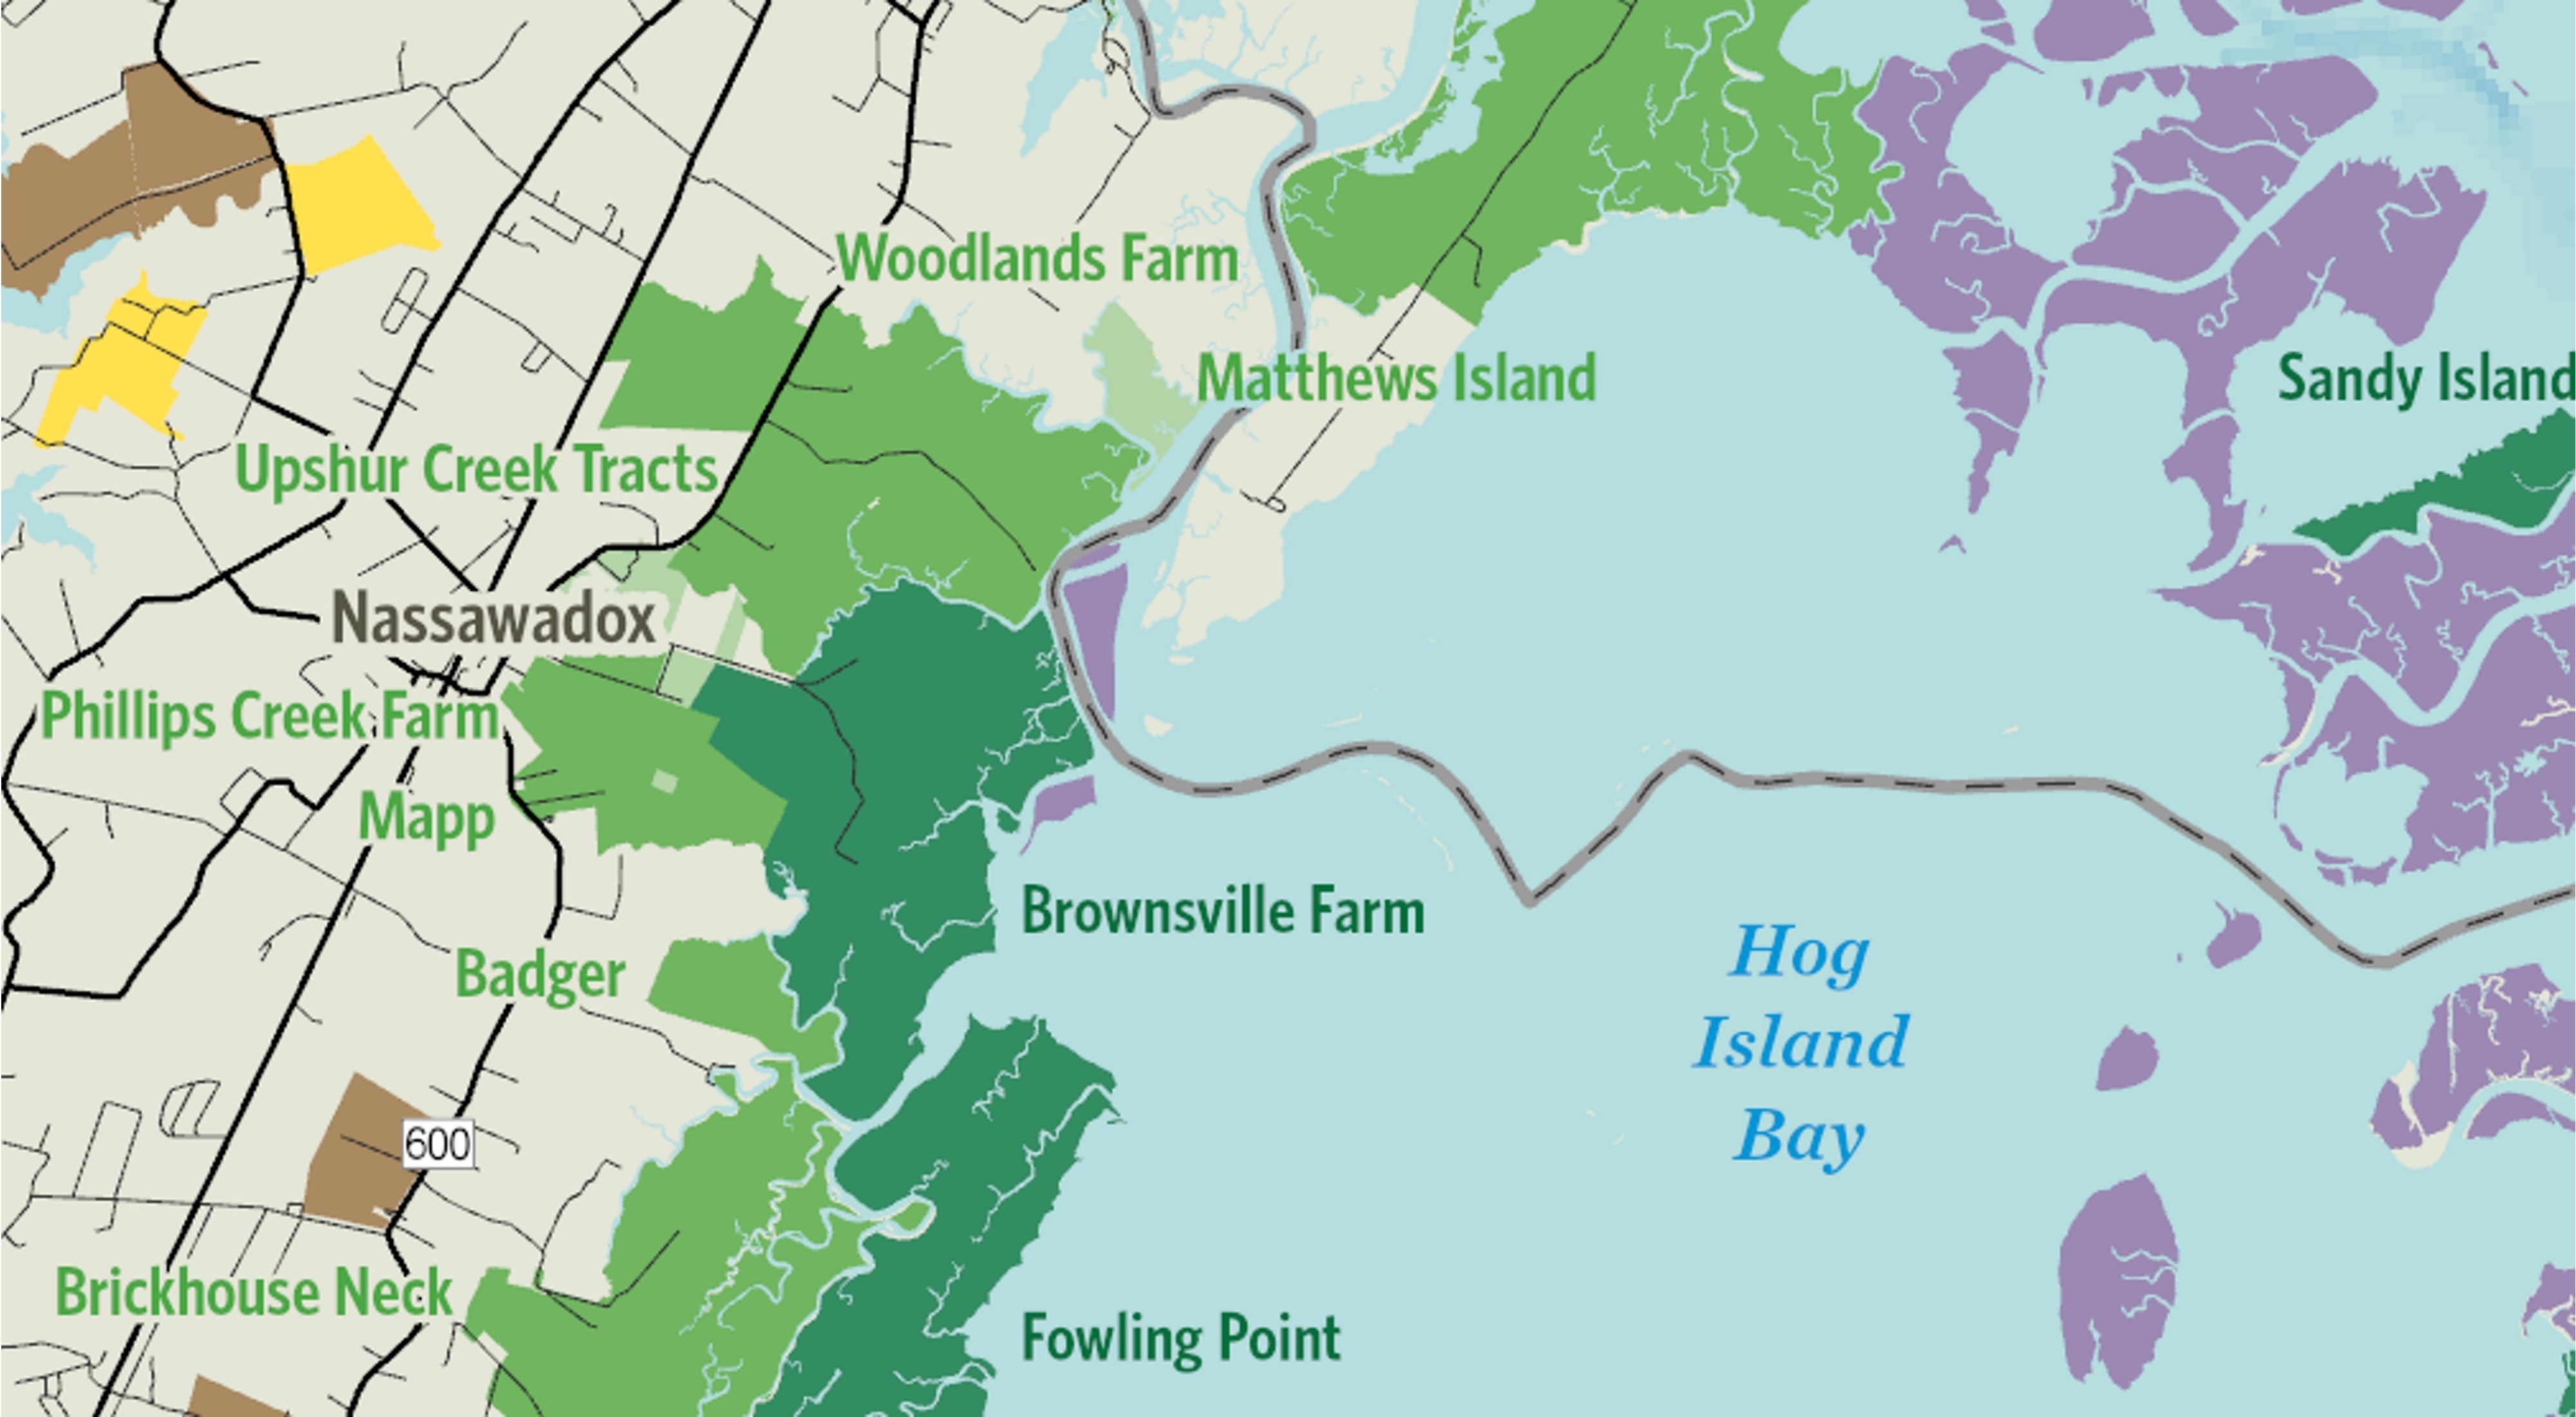 Cartography map of the Virginia Coast Reserve (VCR) with location labels.